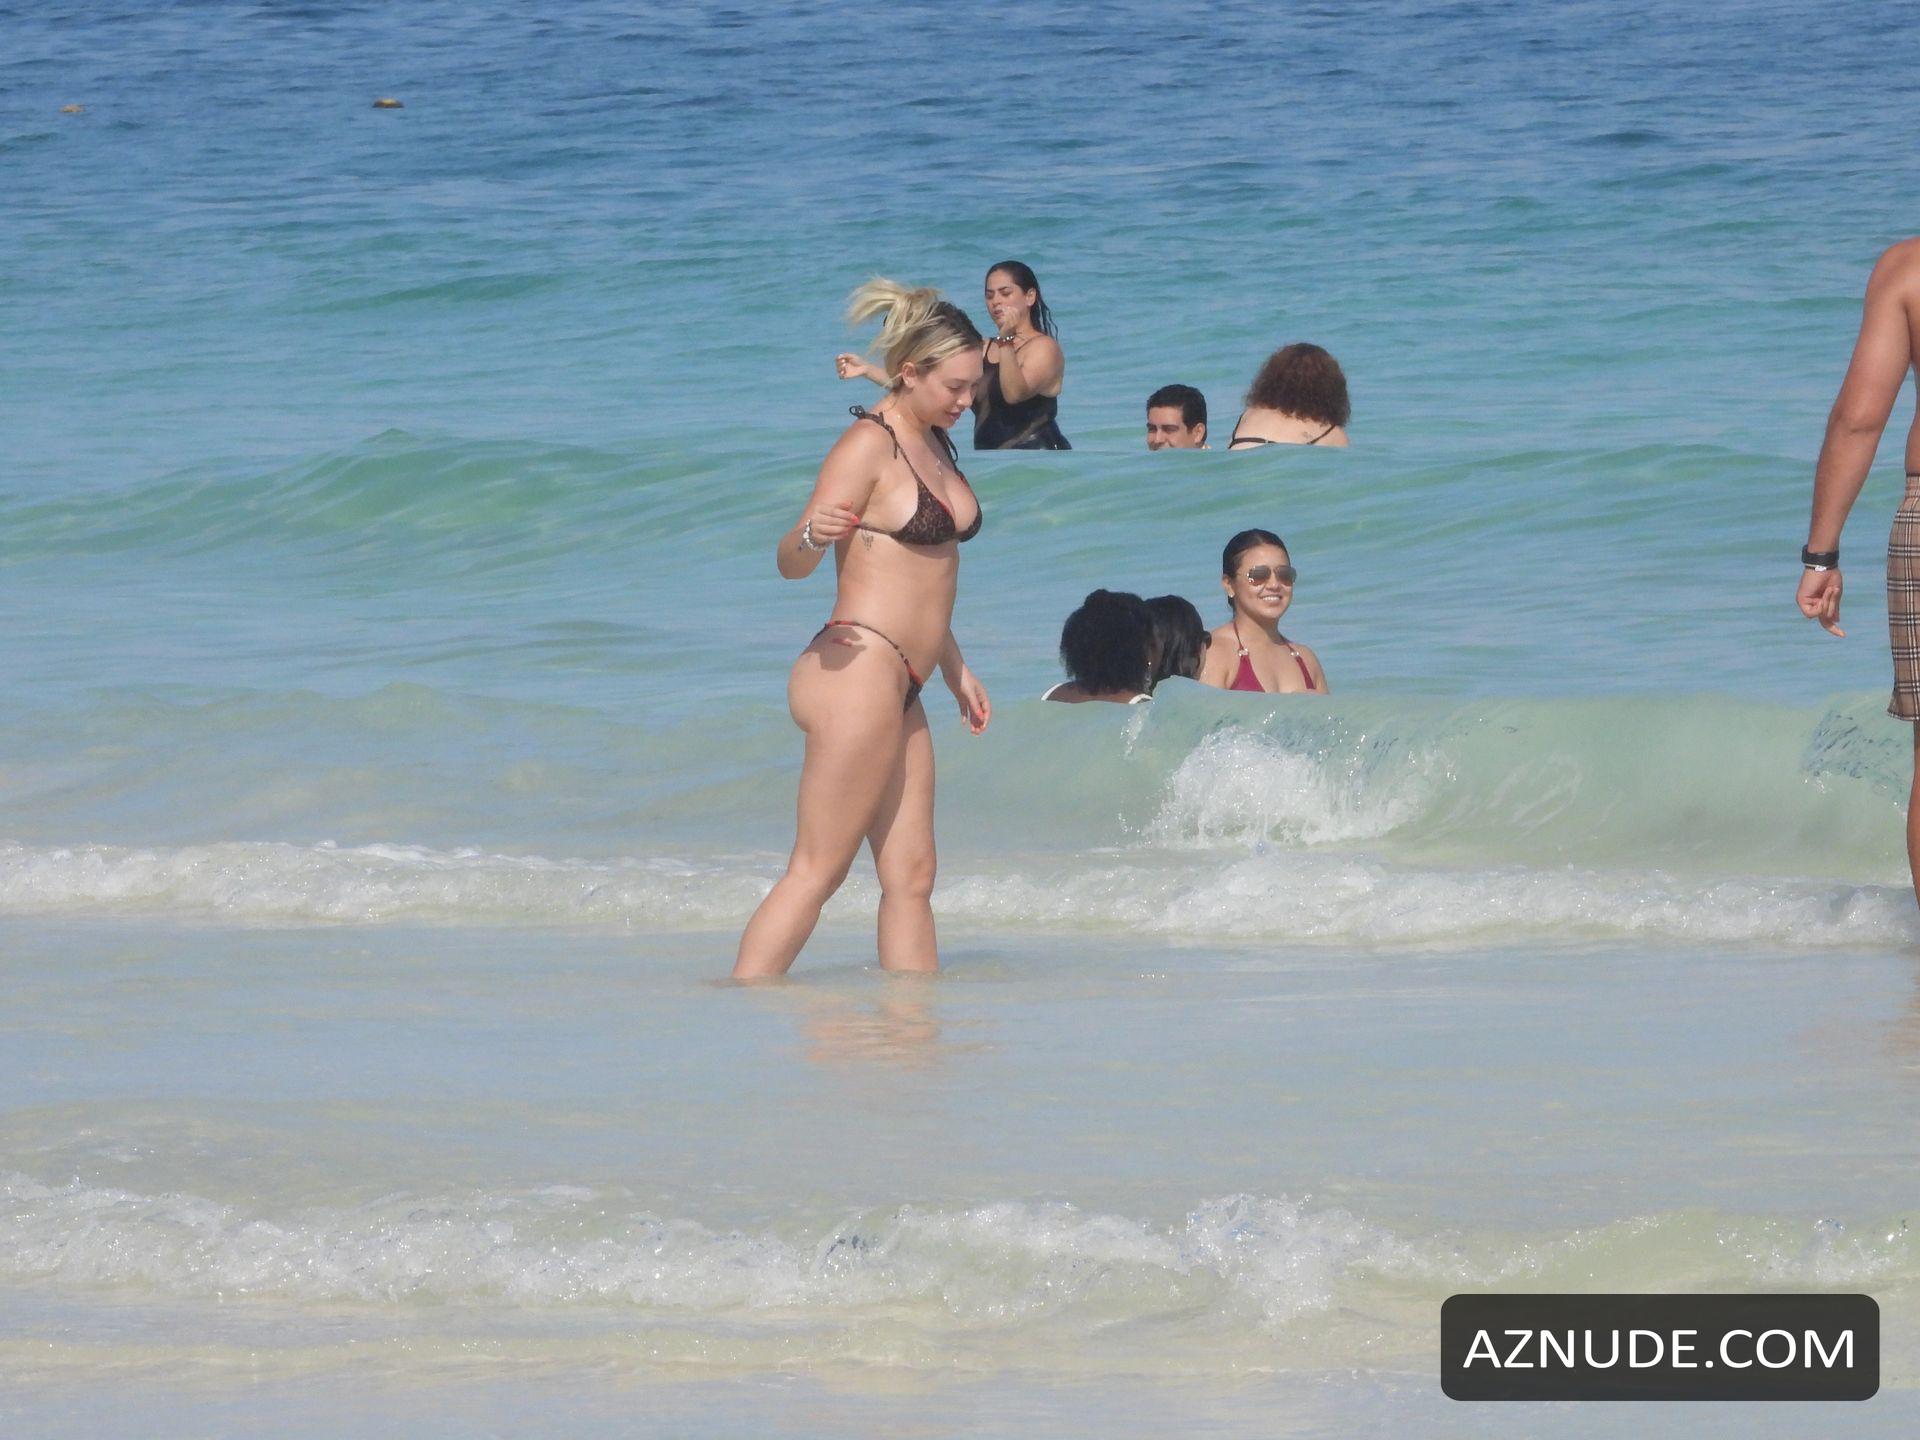 Corinne Olympios Hits The Beach In Mexico Aznude 